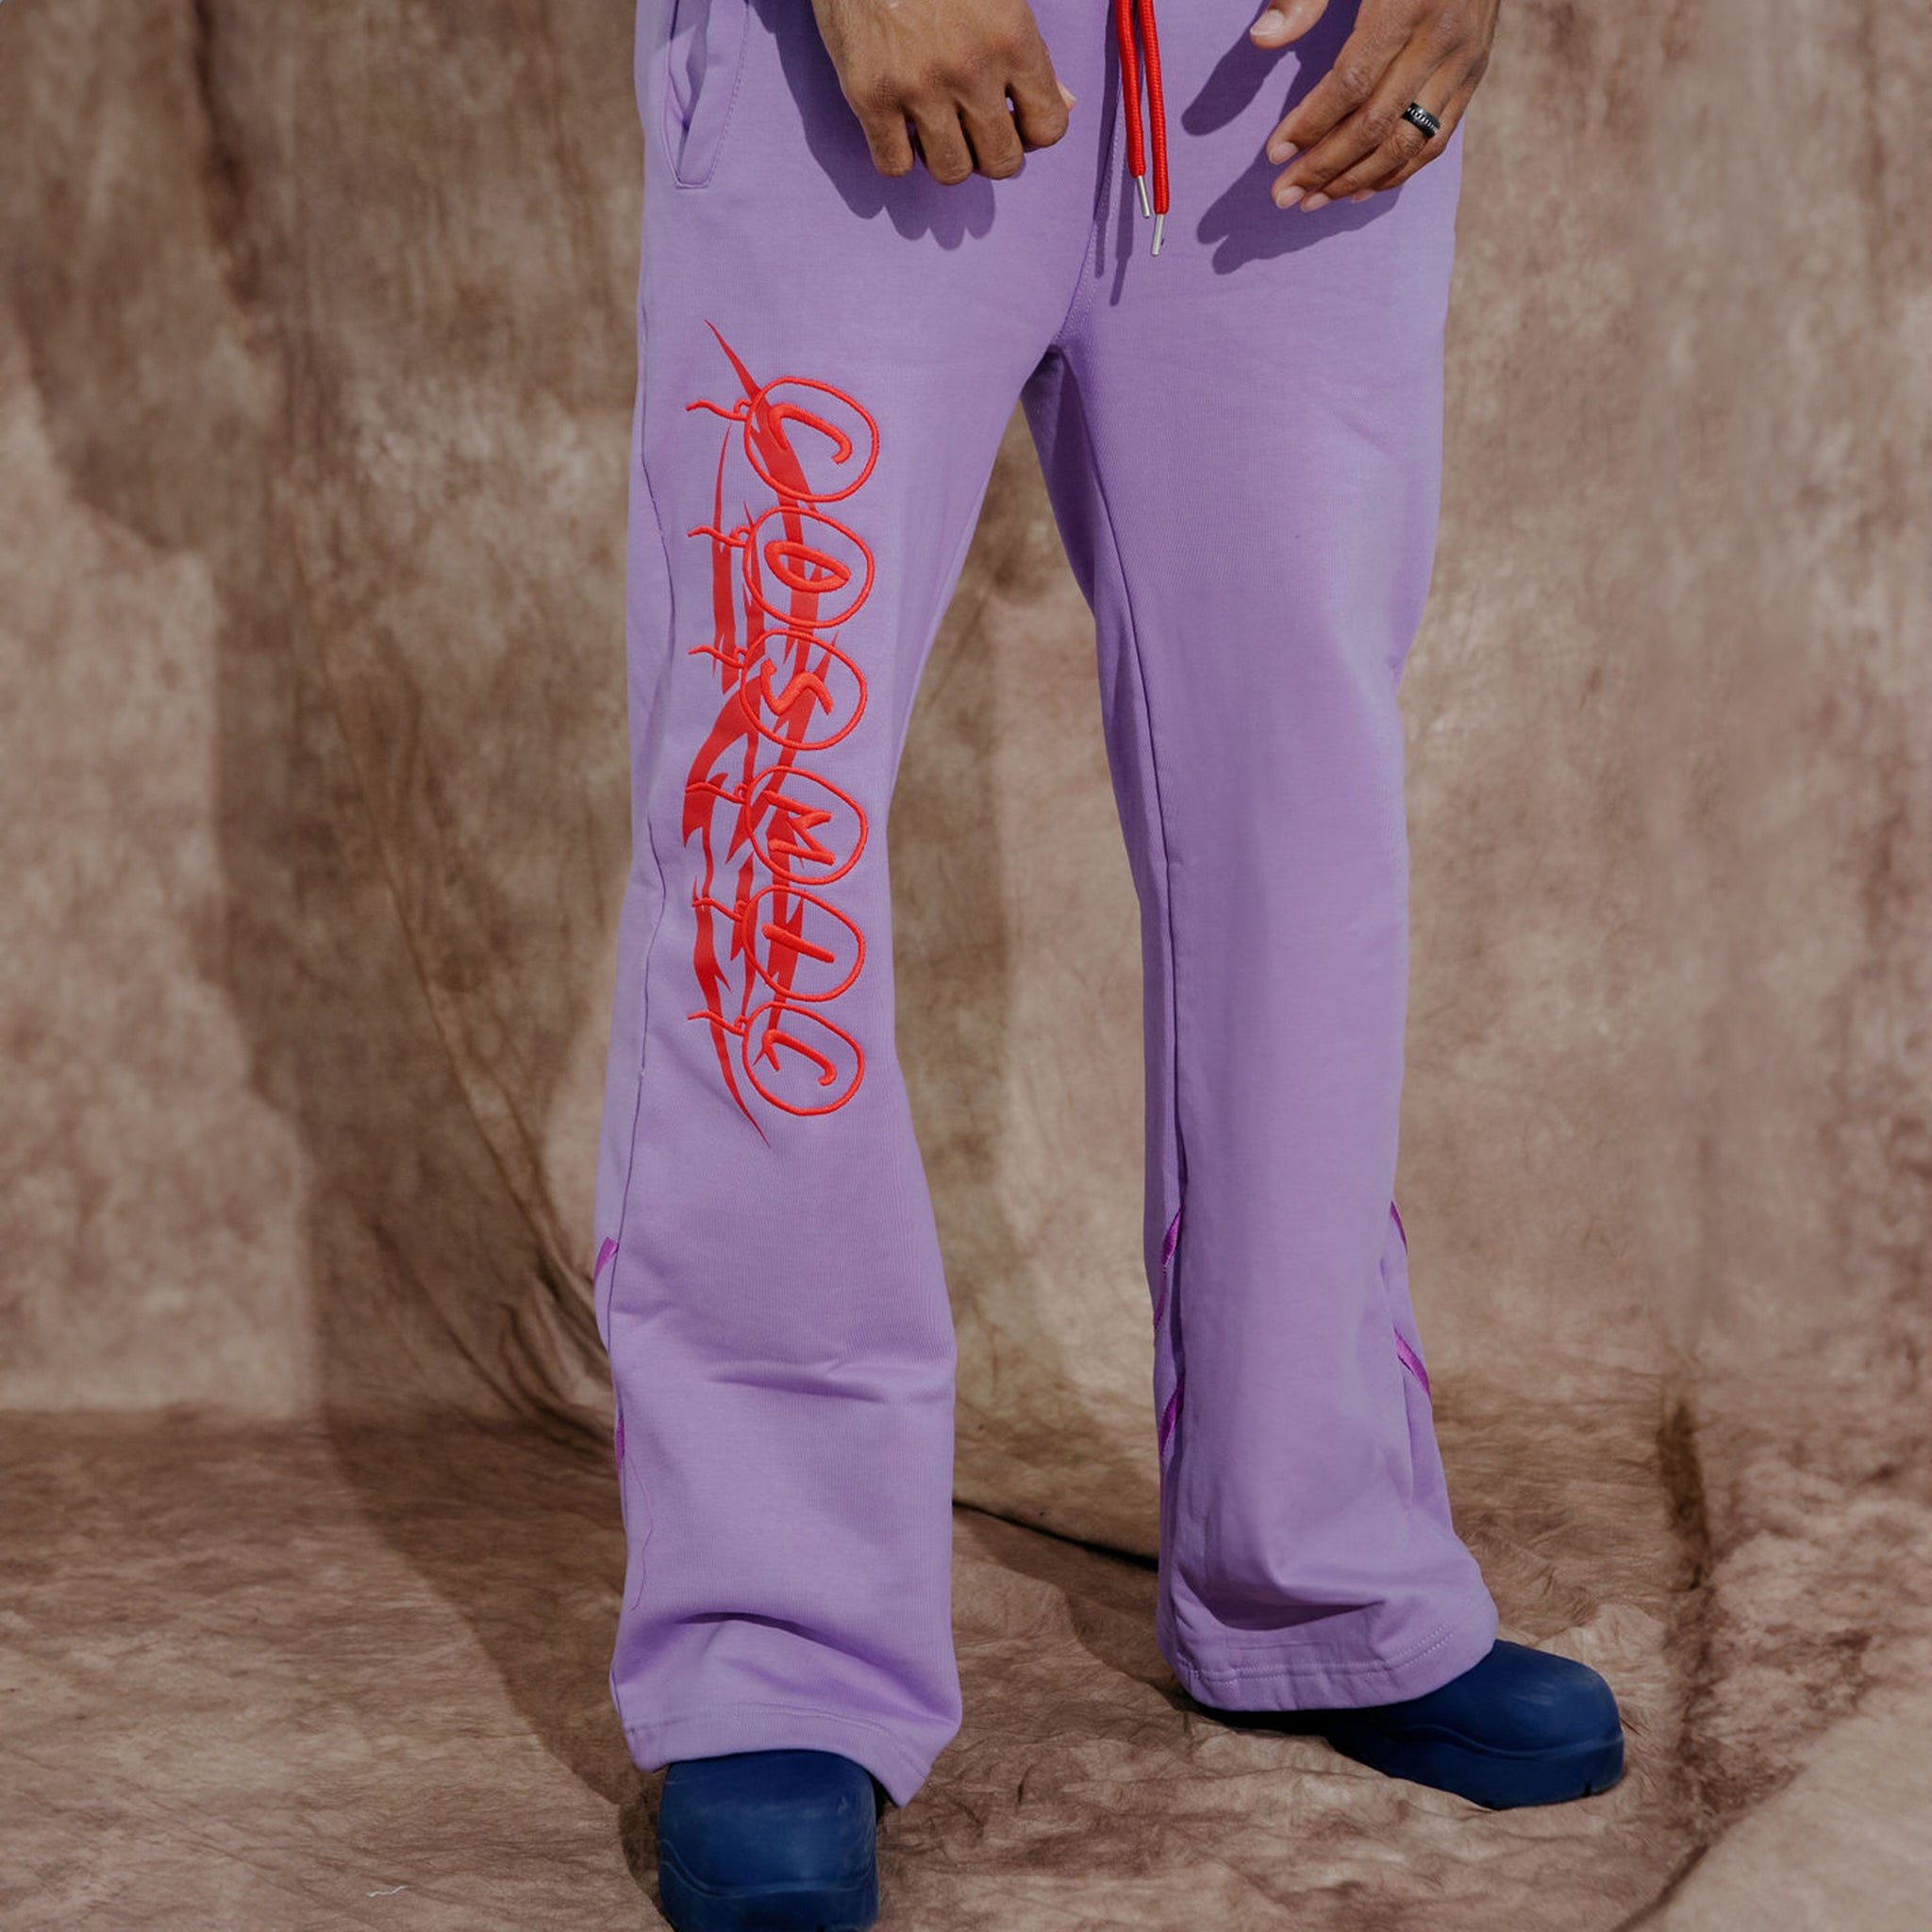 Cosmic the Oasis offers the Ube Collection, starting with this crew neck 100% cotton heavyweight sweatshirt, with decorative Cosmic logo.  Forms a sweatsuit set with the Aspen Heavyweight Sweatpants (sold separately).